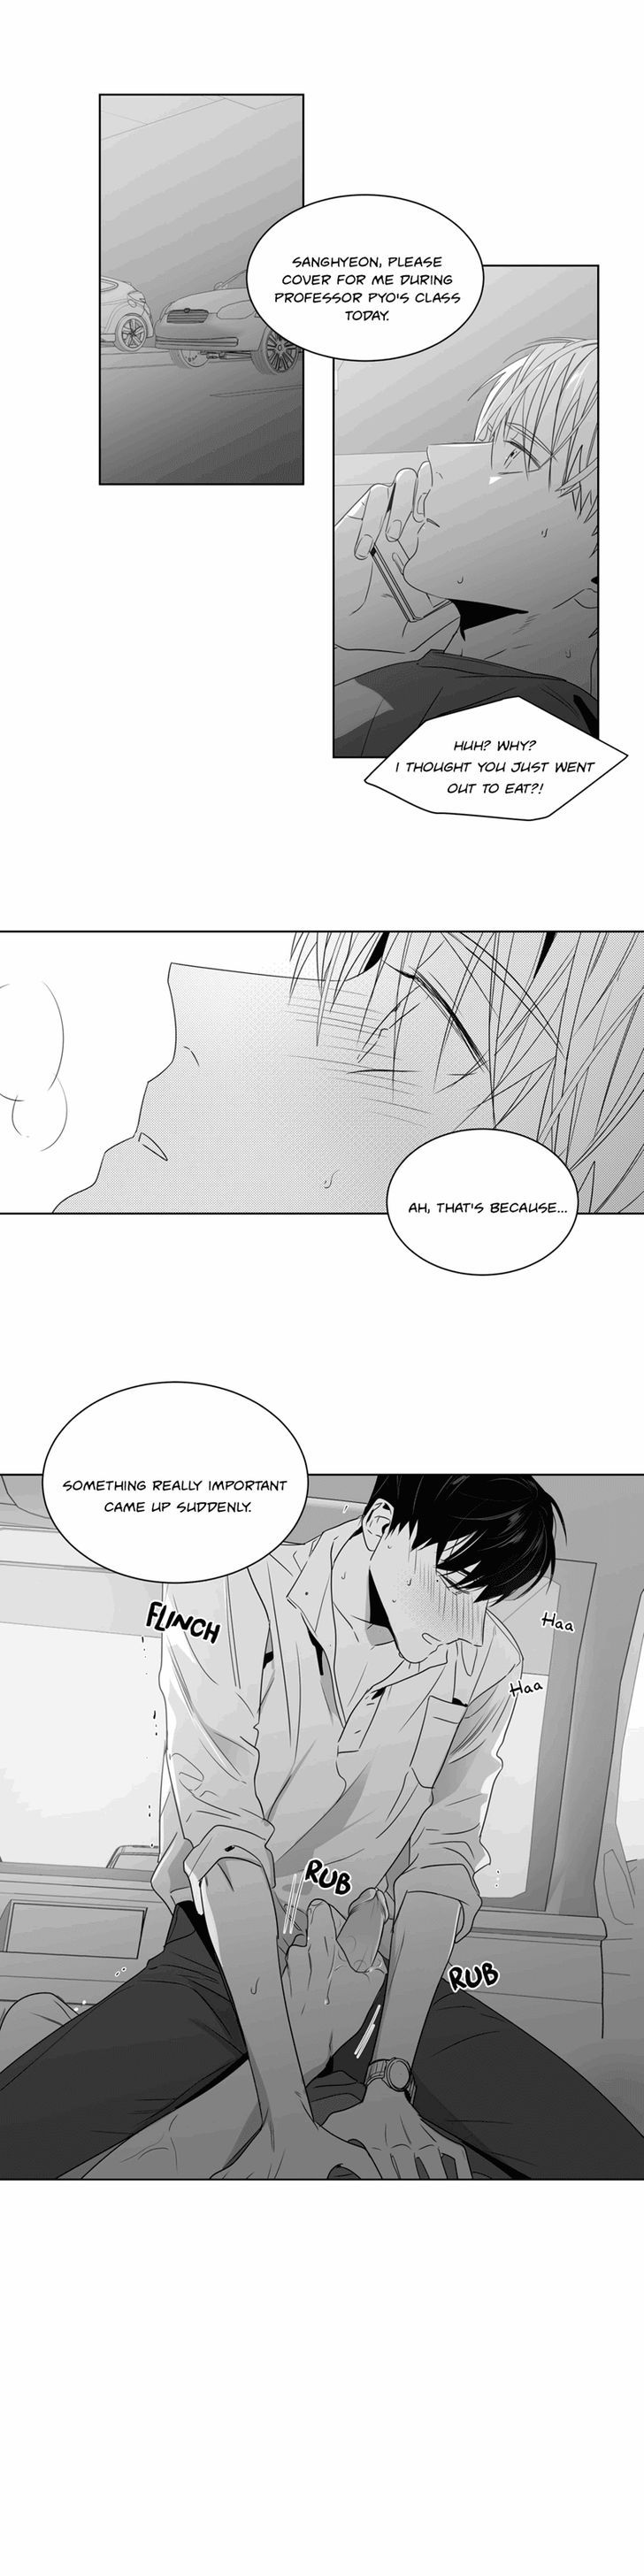 Lover Boy (Lezhin) Chapter 039 page 2